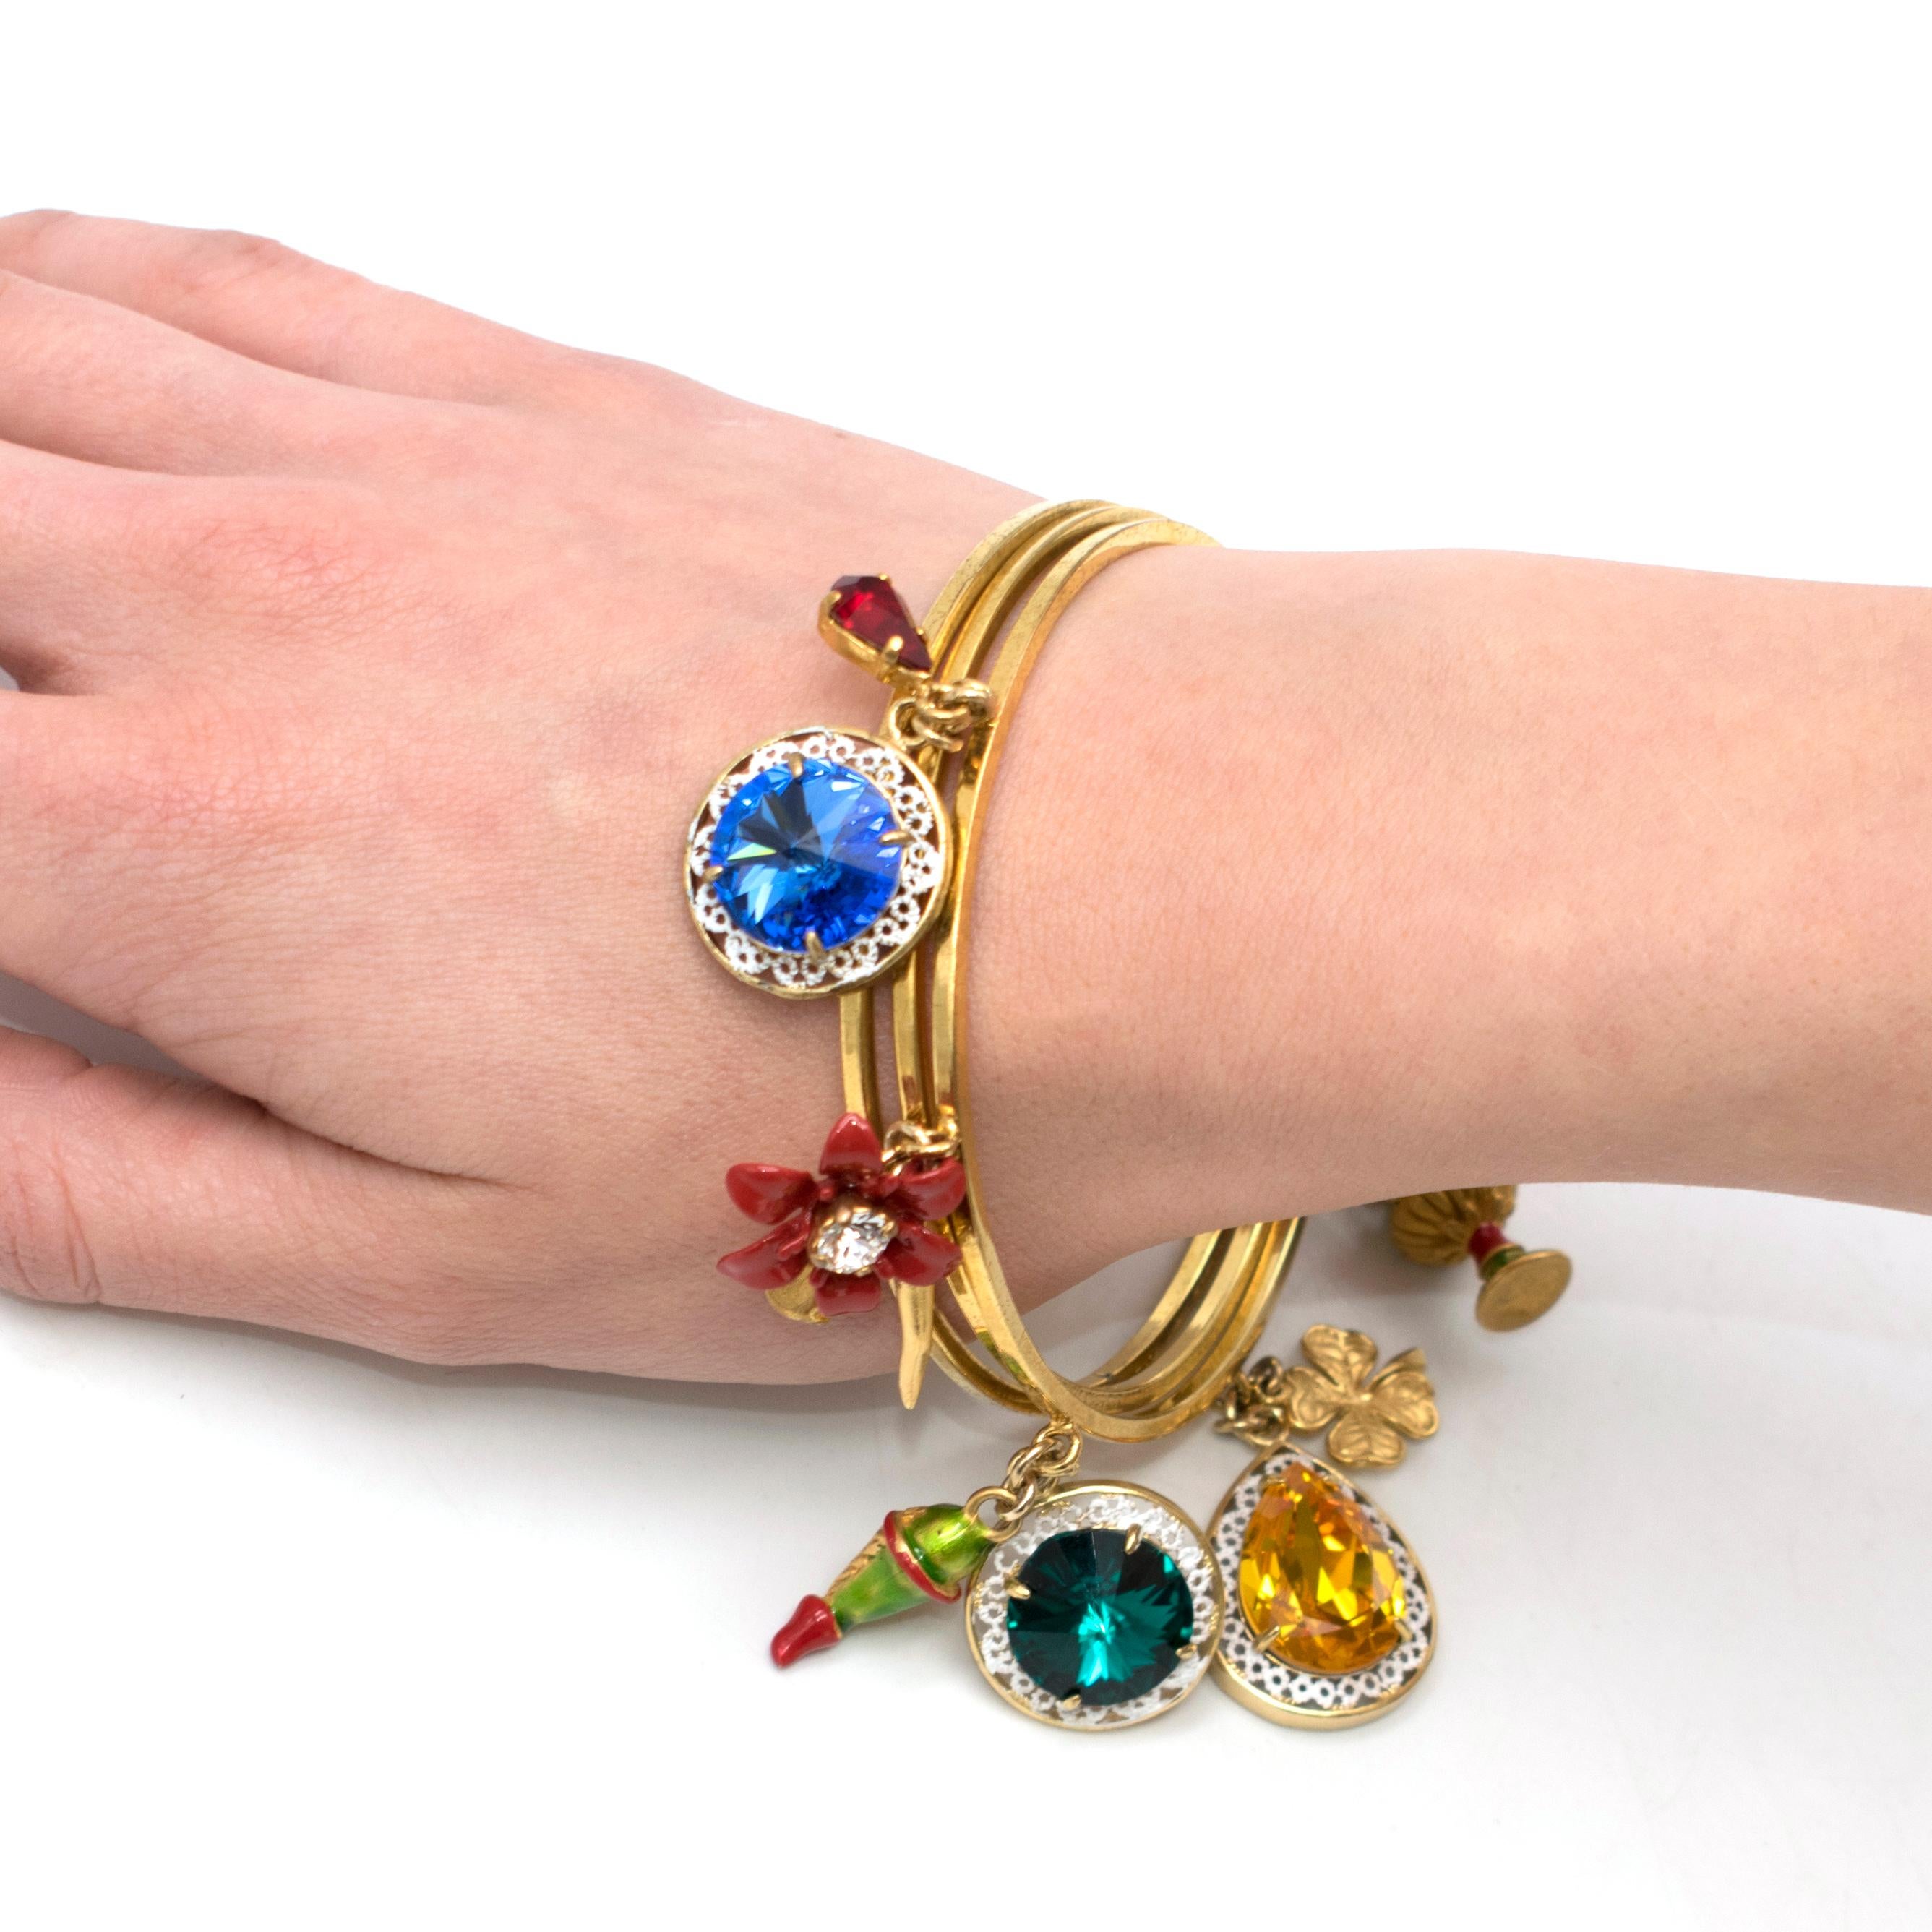 Dolce & Gabbana fruit-charm stacked bangle 

- Gold-tone brass
- Triple stacked polished bangles 
- Multicoloured resin and crystal encrusted multi-motif charms 

Please note, these items are pre-owned and may show some signs of storage, even when